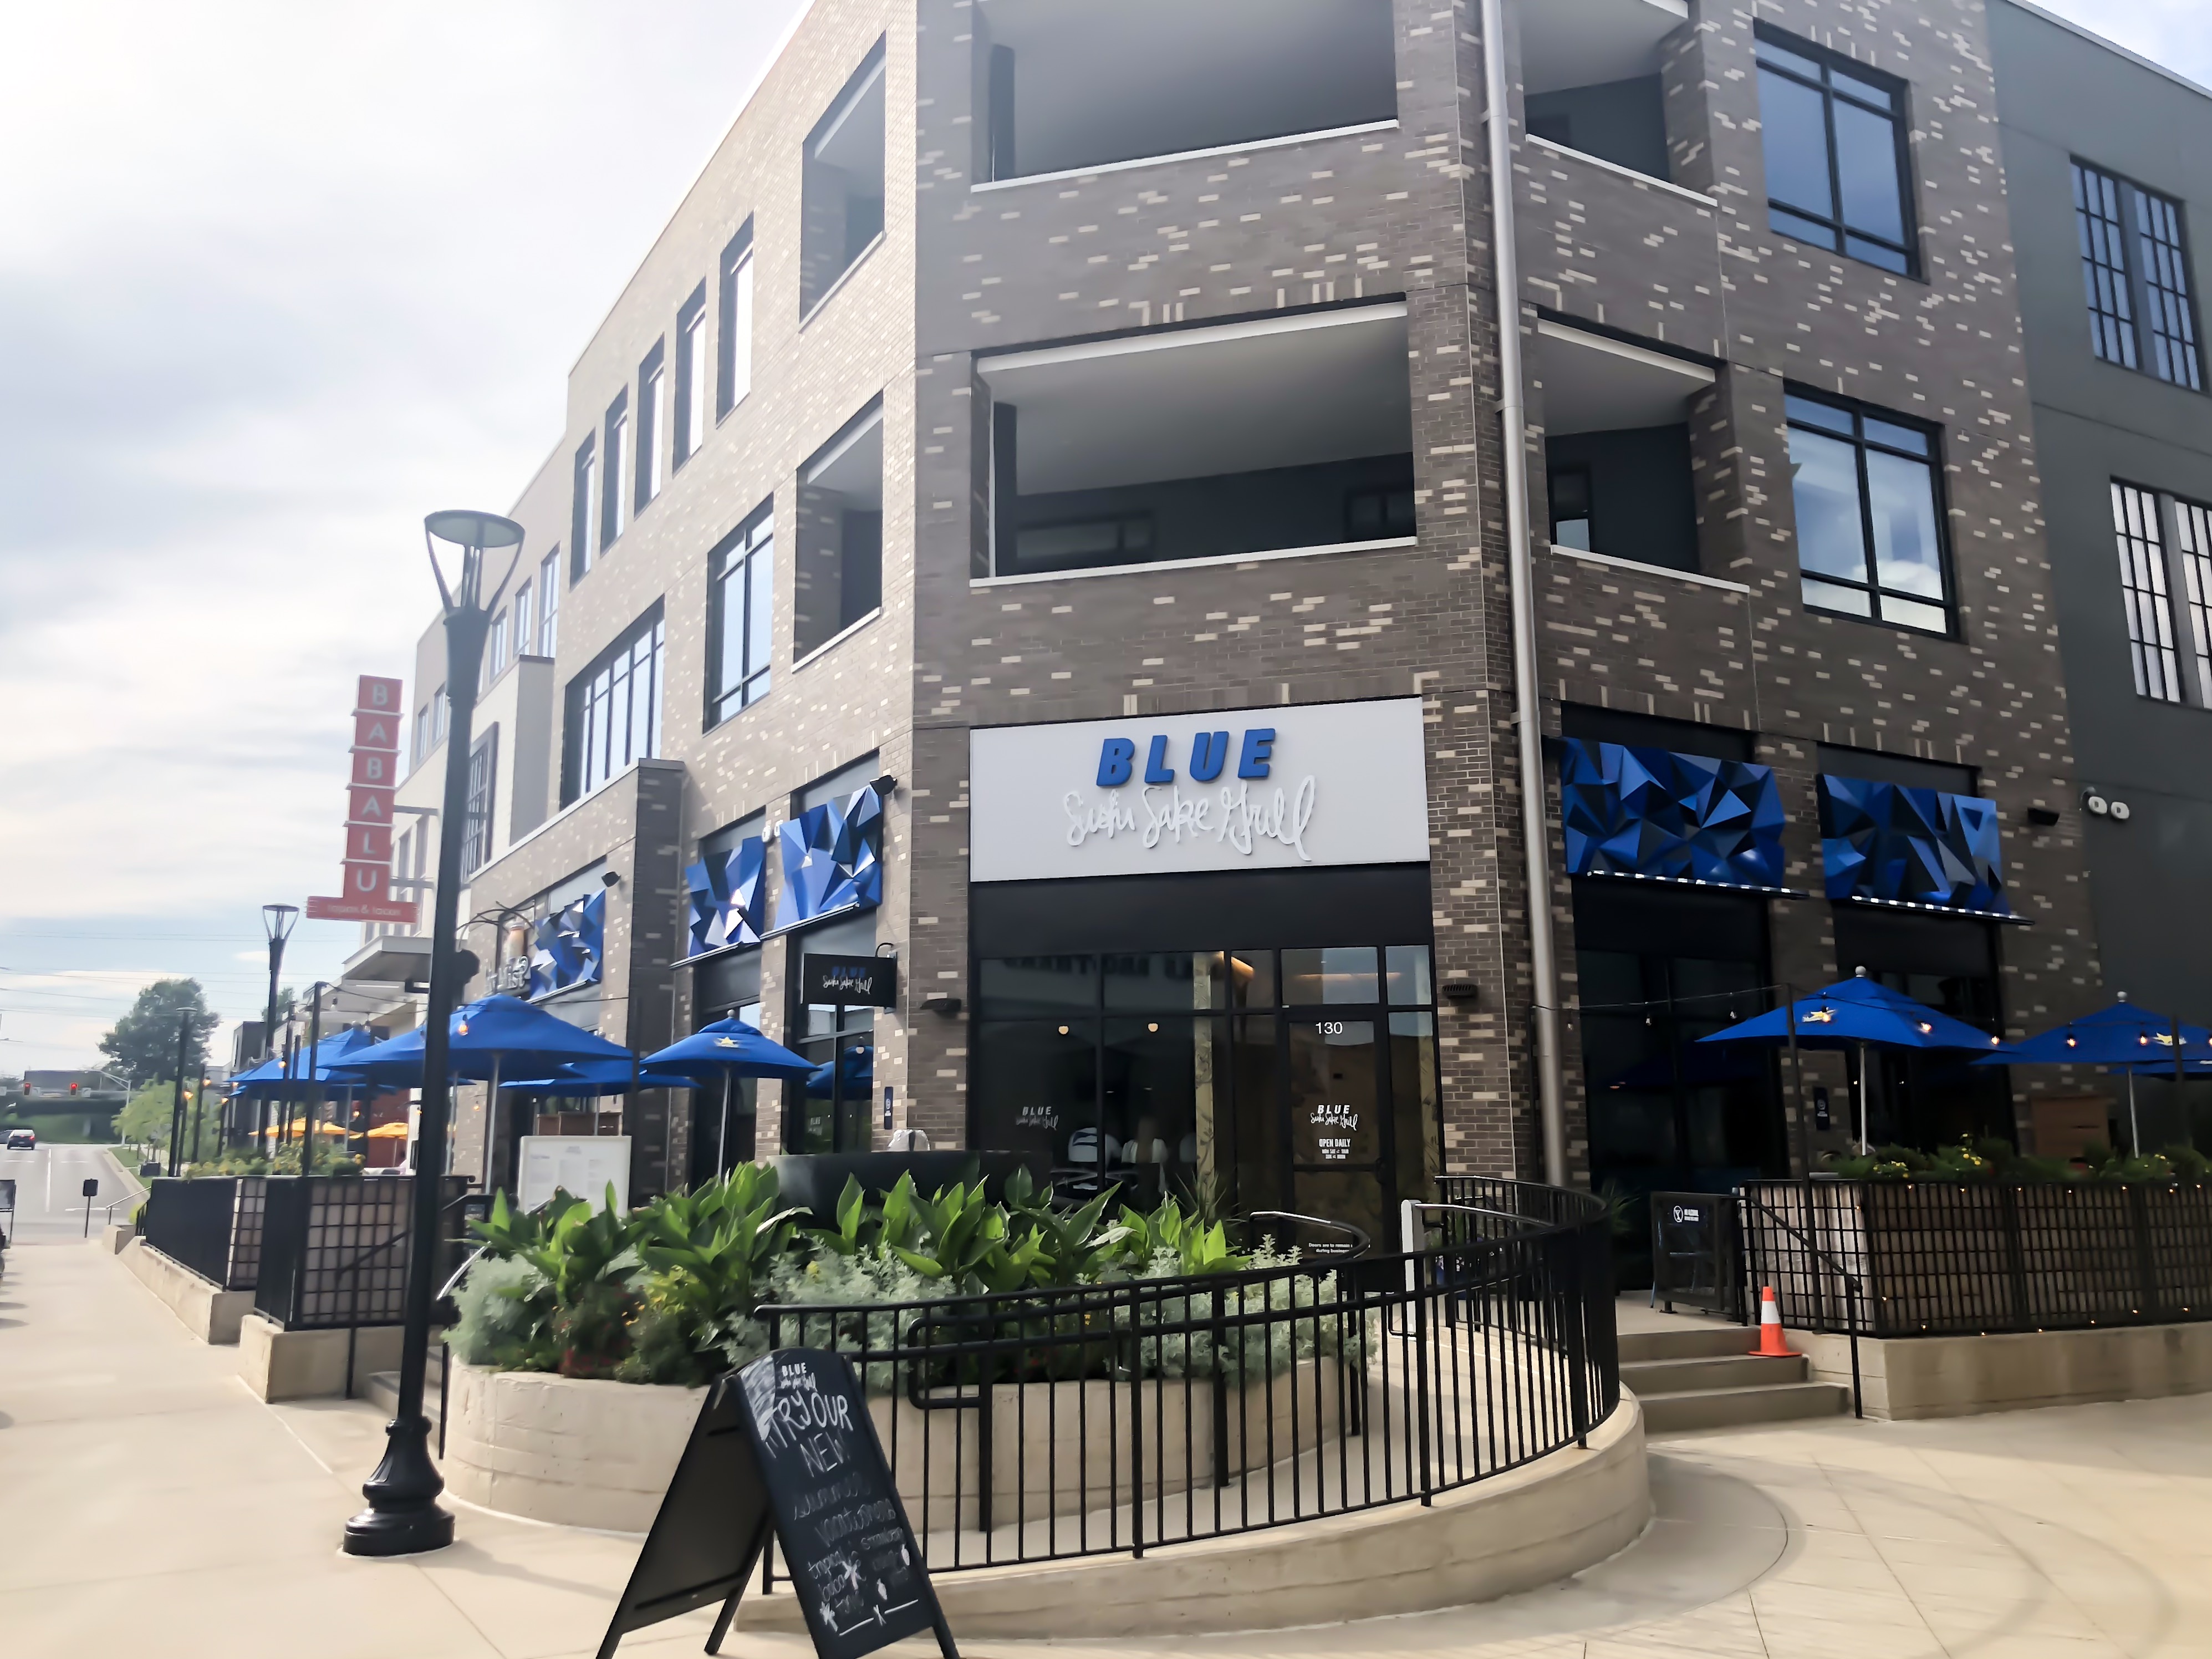 Blue Sushi Sake Grill is a great place to enjoy old favorites or embark on a dining adventure. It's the ultimate sushi destination for sushi experts and newcomers. Blue Sushi Sake Grill has everything from traditional and creative maki, sashimi and nigiri, as well as vegan maki. #sharethelex #lexingtonky #kentucky #sushi #food #tasteky #eatkentucky #eatlexington #betterinthebluegrass #thesummitatfritzfarm